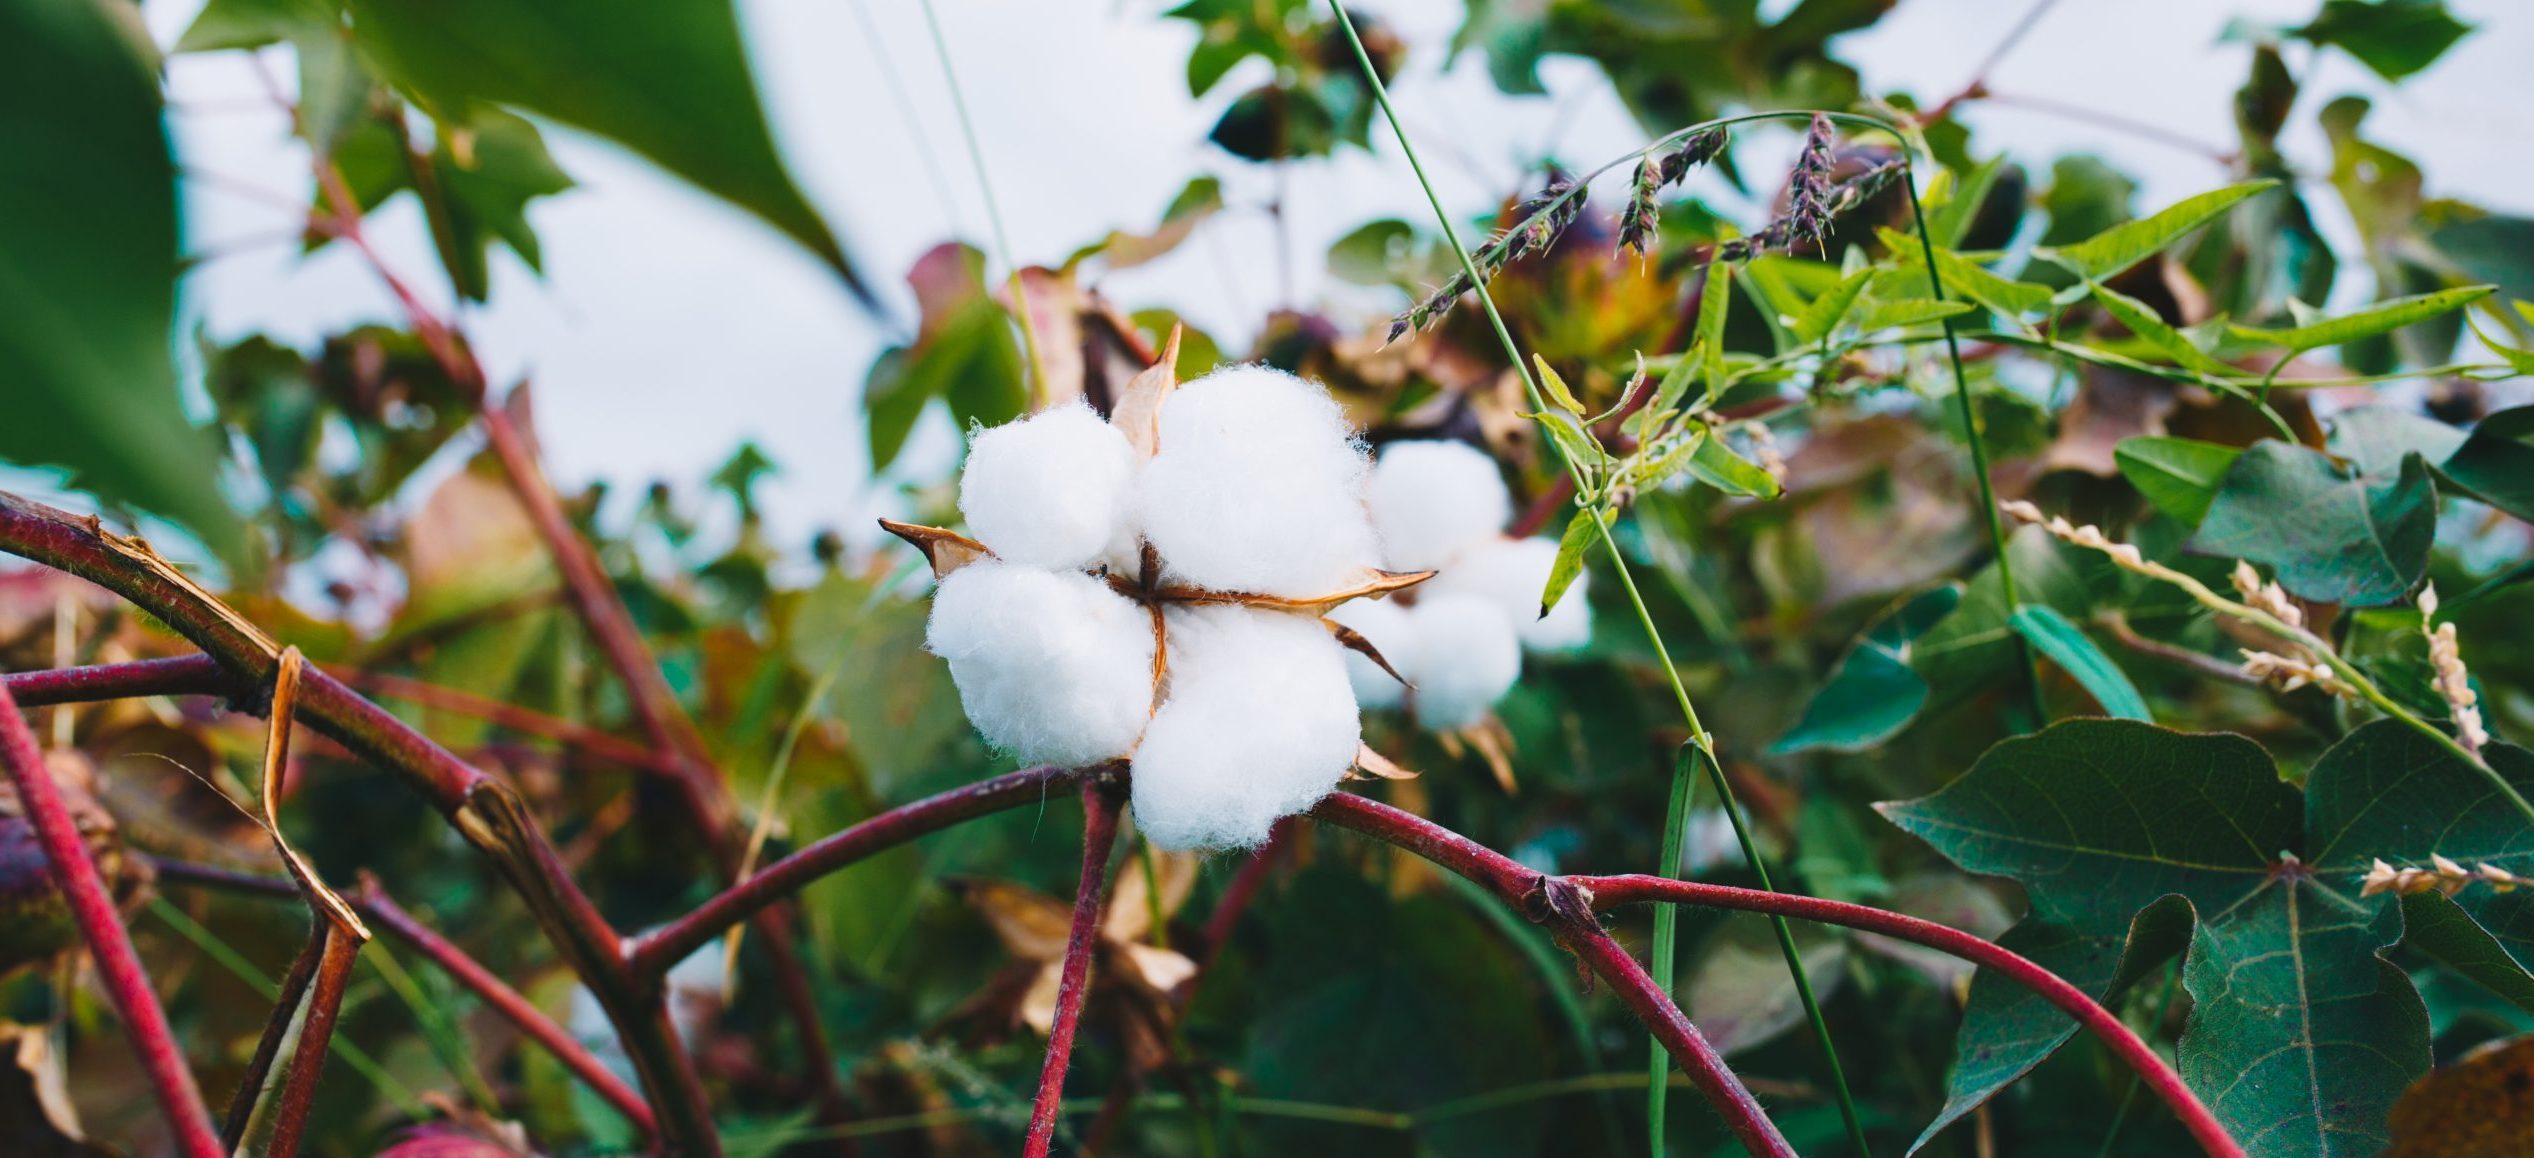 Indian Cotton | Best Indian Cotton Industry